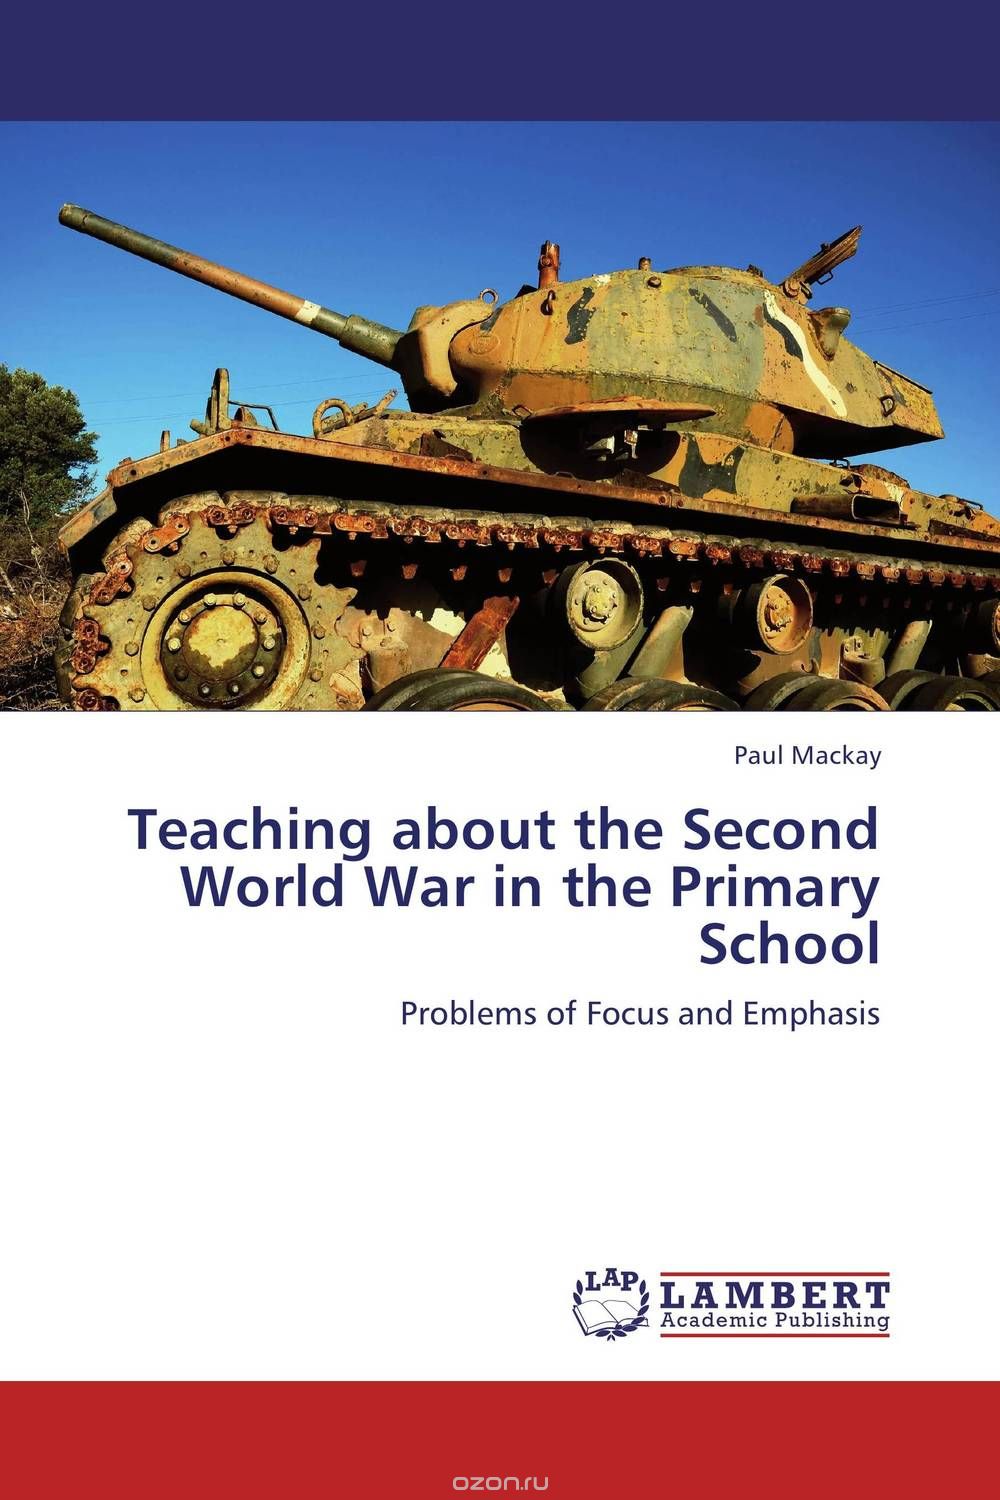 Скачать книгу "Teaching about the Second World War in the Primary School"